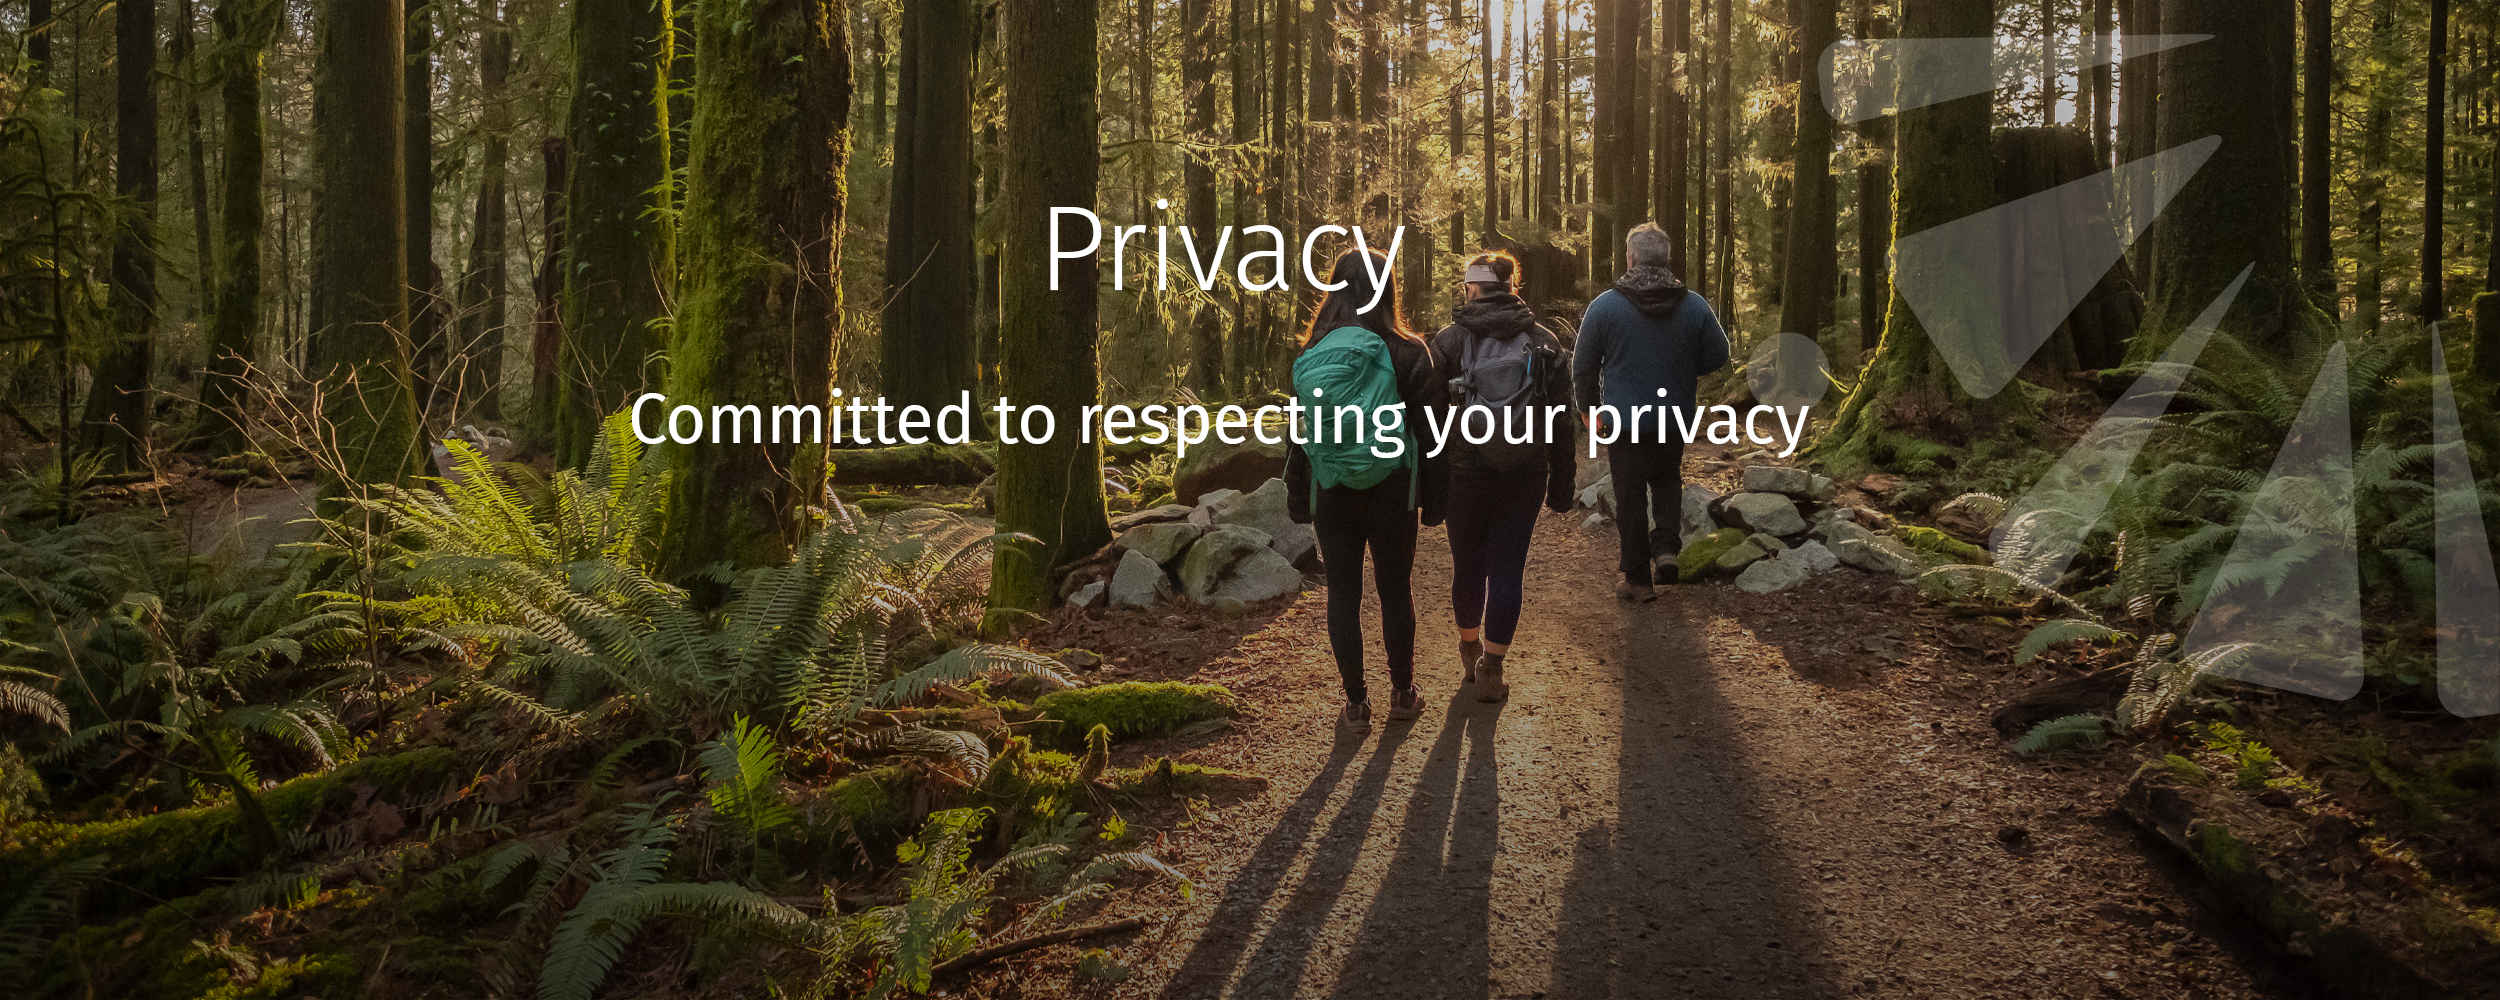 Committed to respecting your privacy